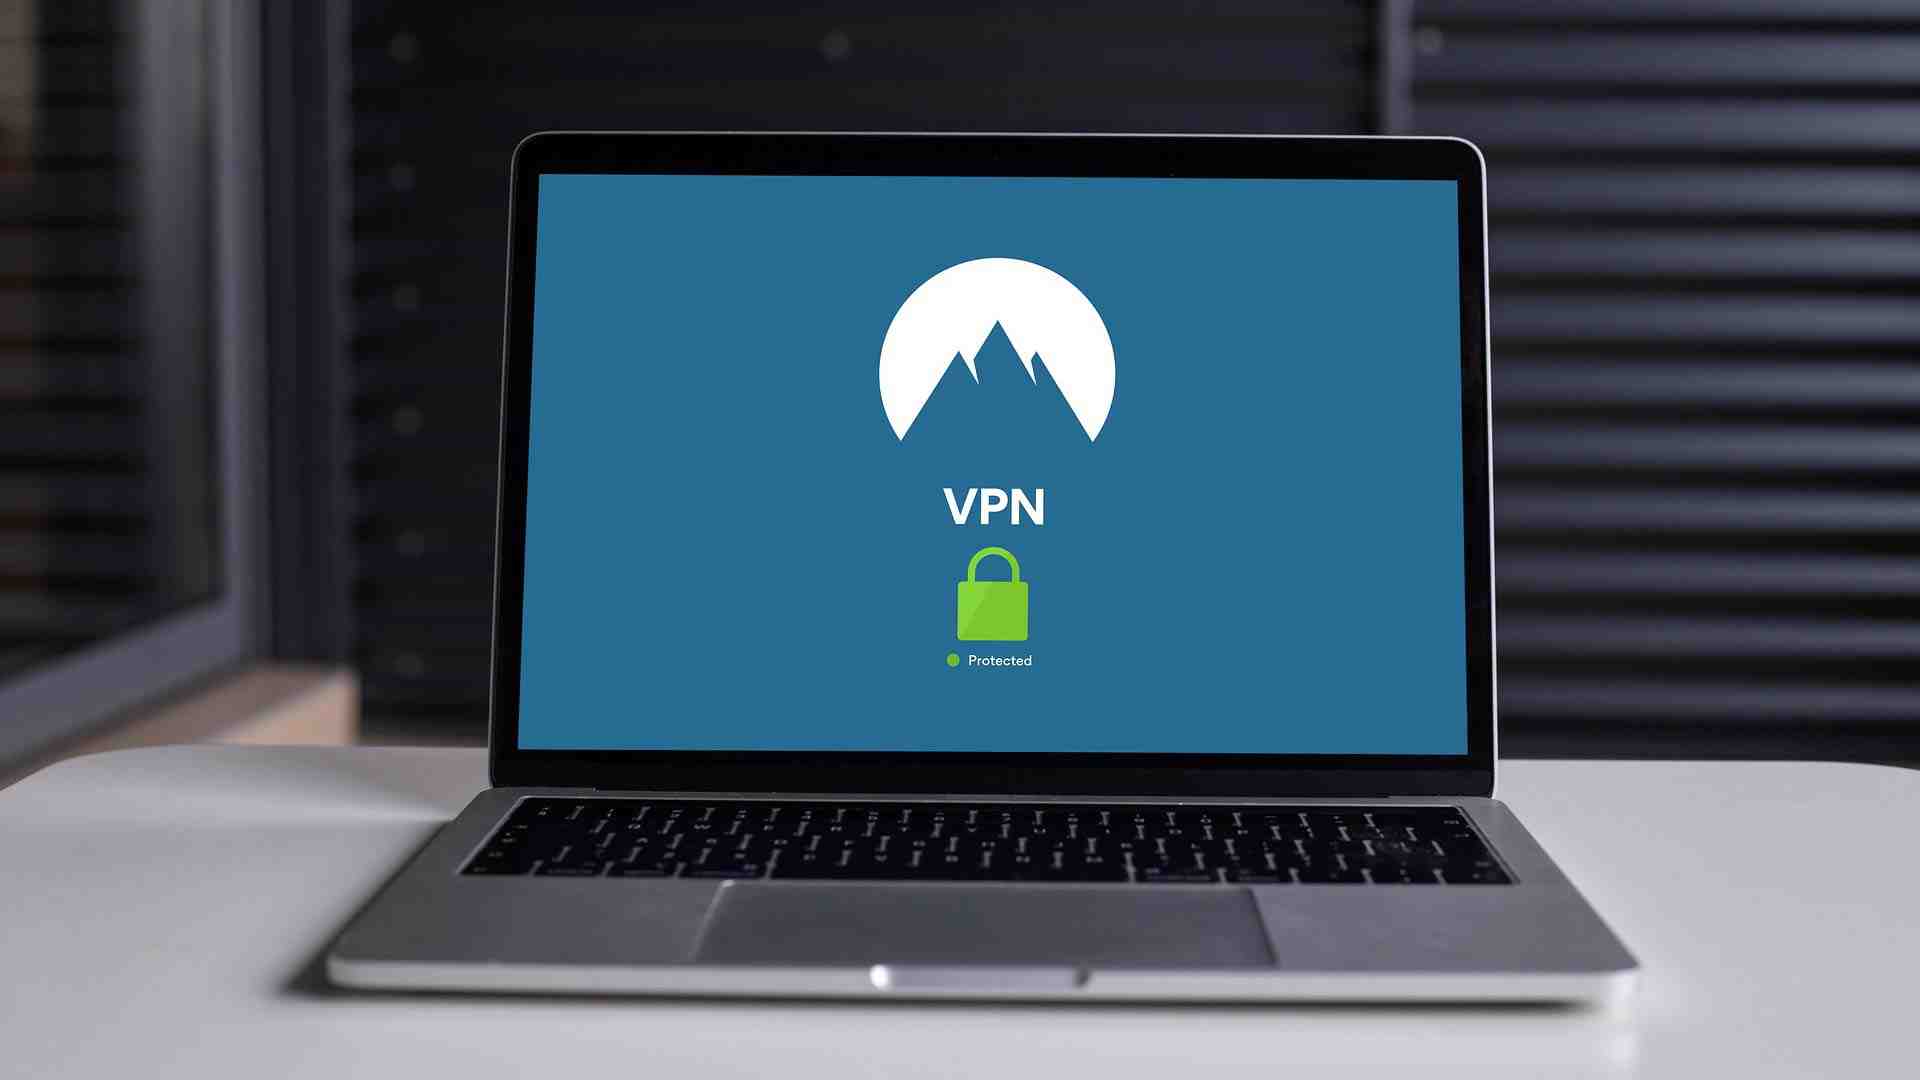 Get lifetime access to a password manager and VPN with this bundle deal